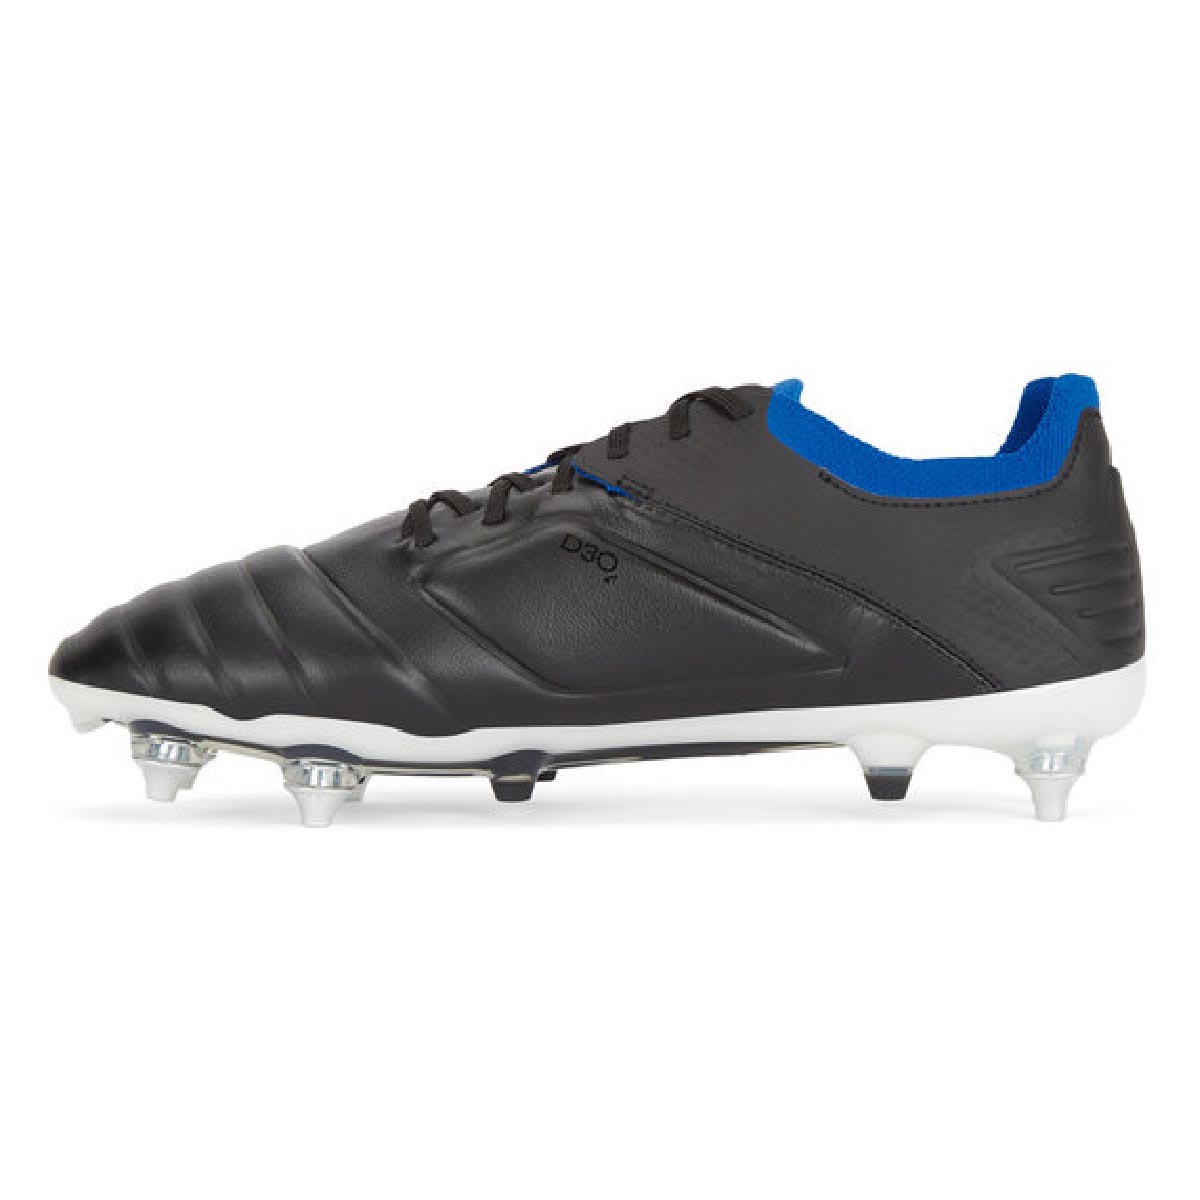 UMBRO TOCCO PRO SOFT GROUND FOOTBALL BOOTS